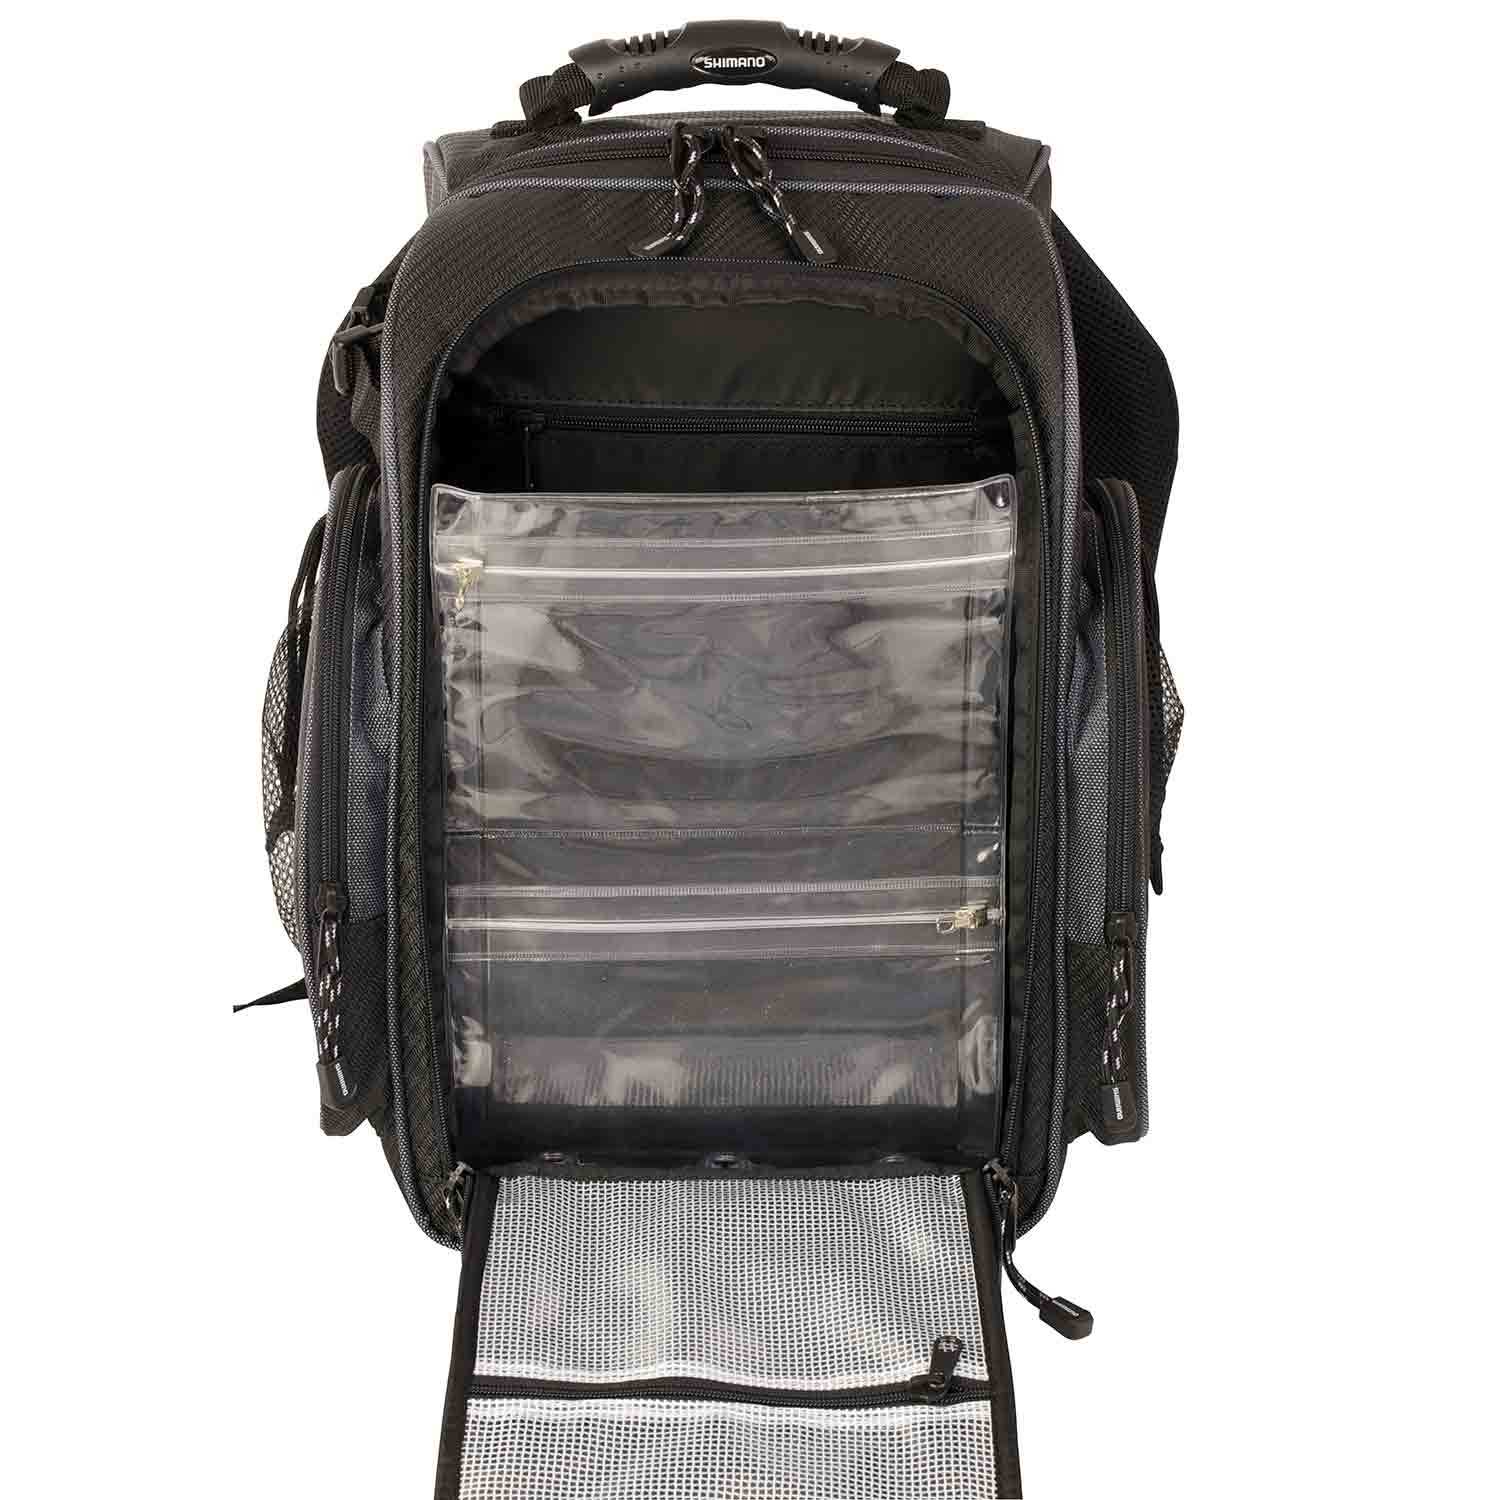 Shimano BlackMoon Fishing Backpack for Sale in Visalia, CA - OfferUp